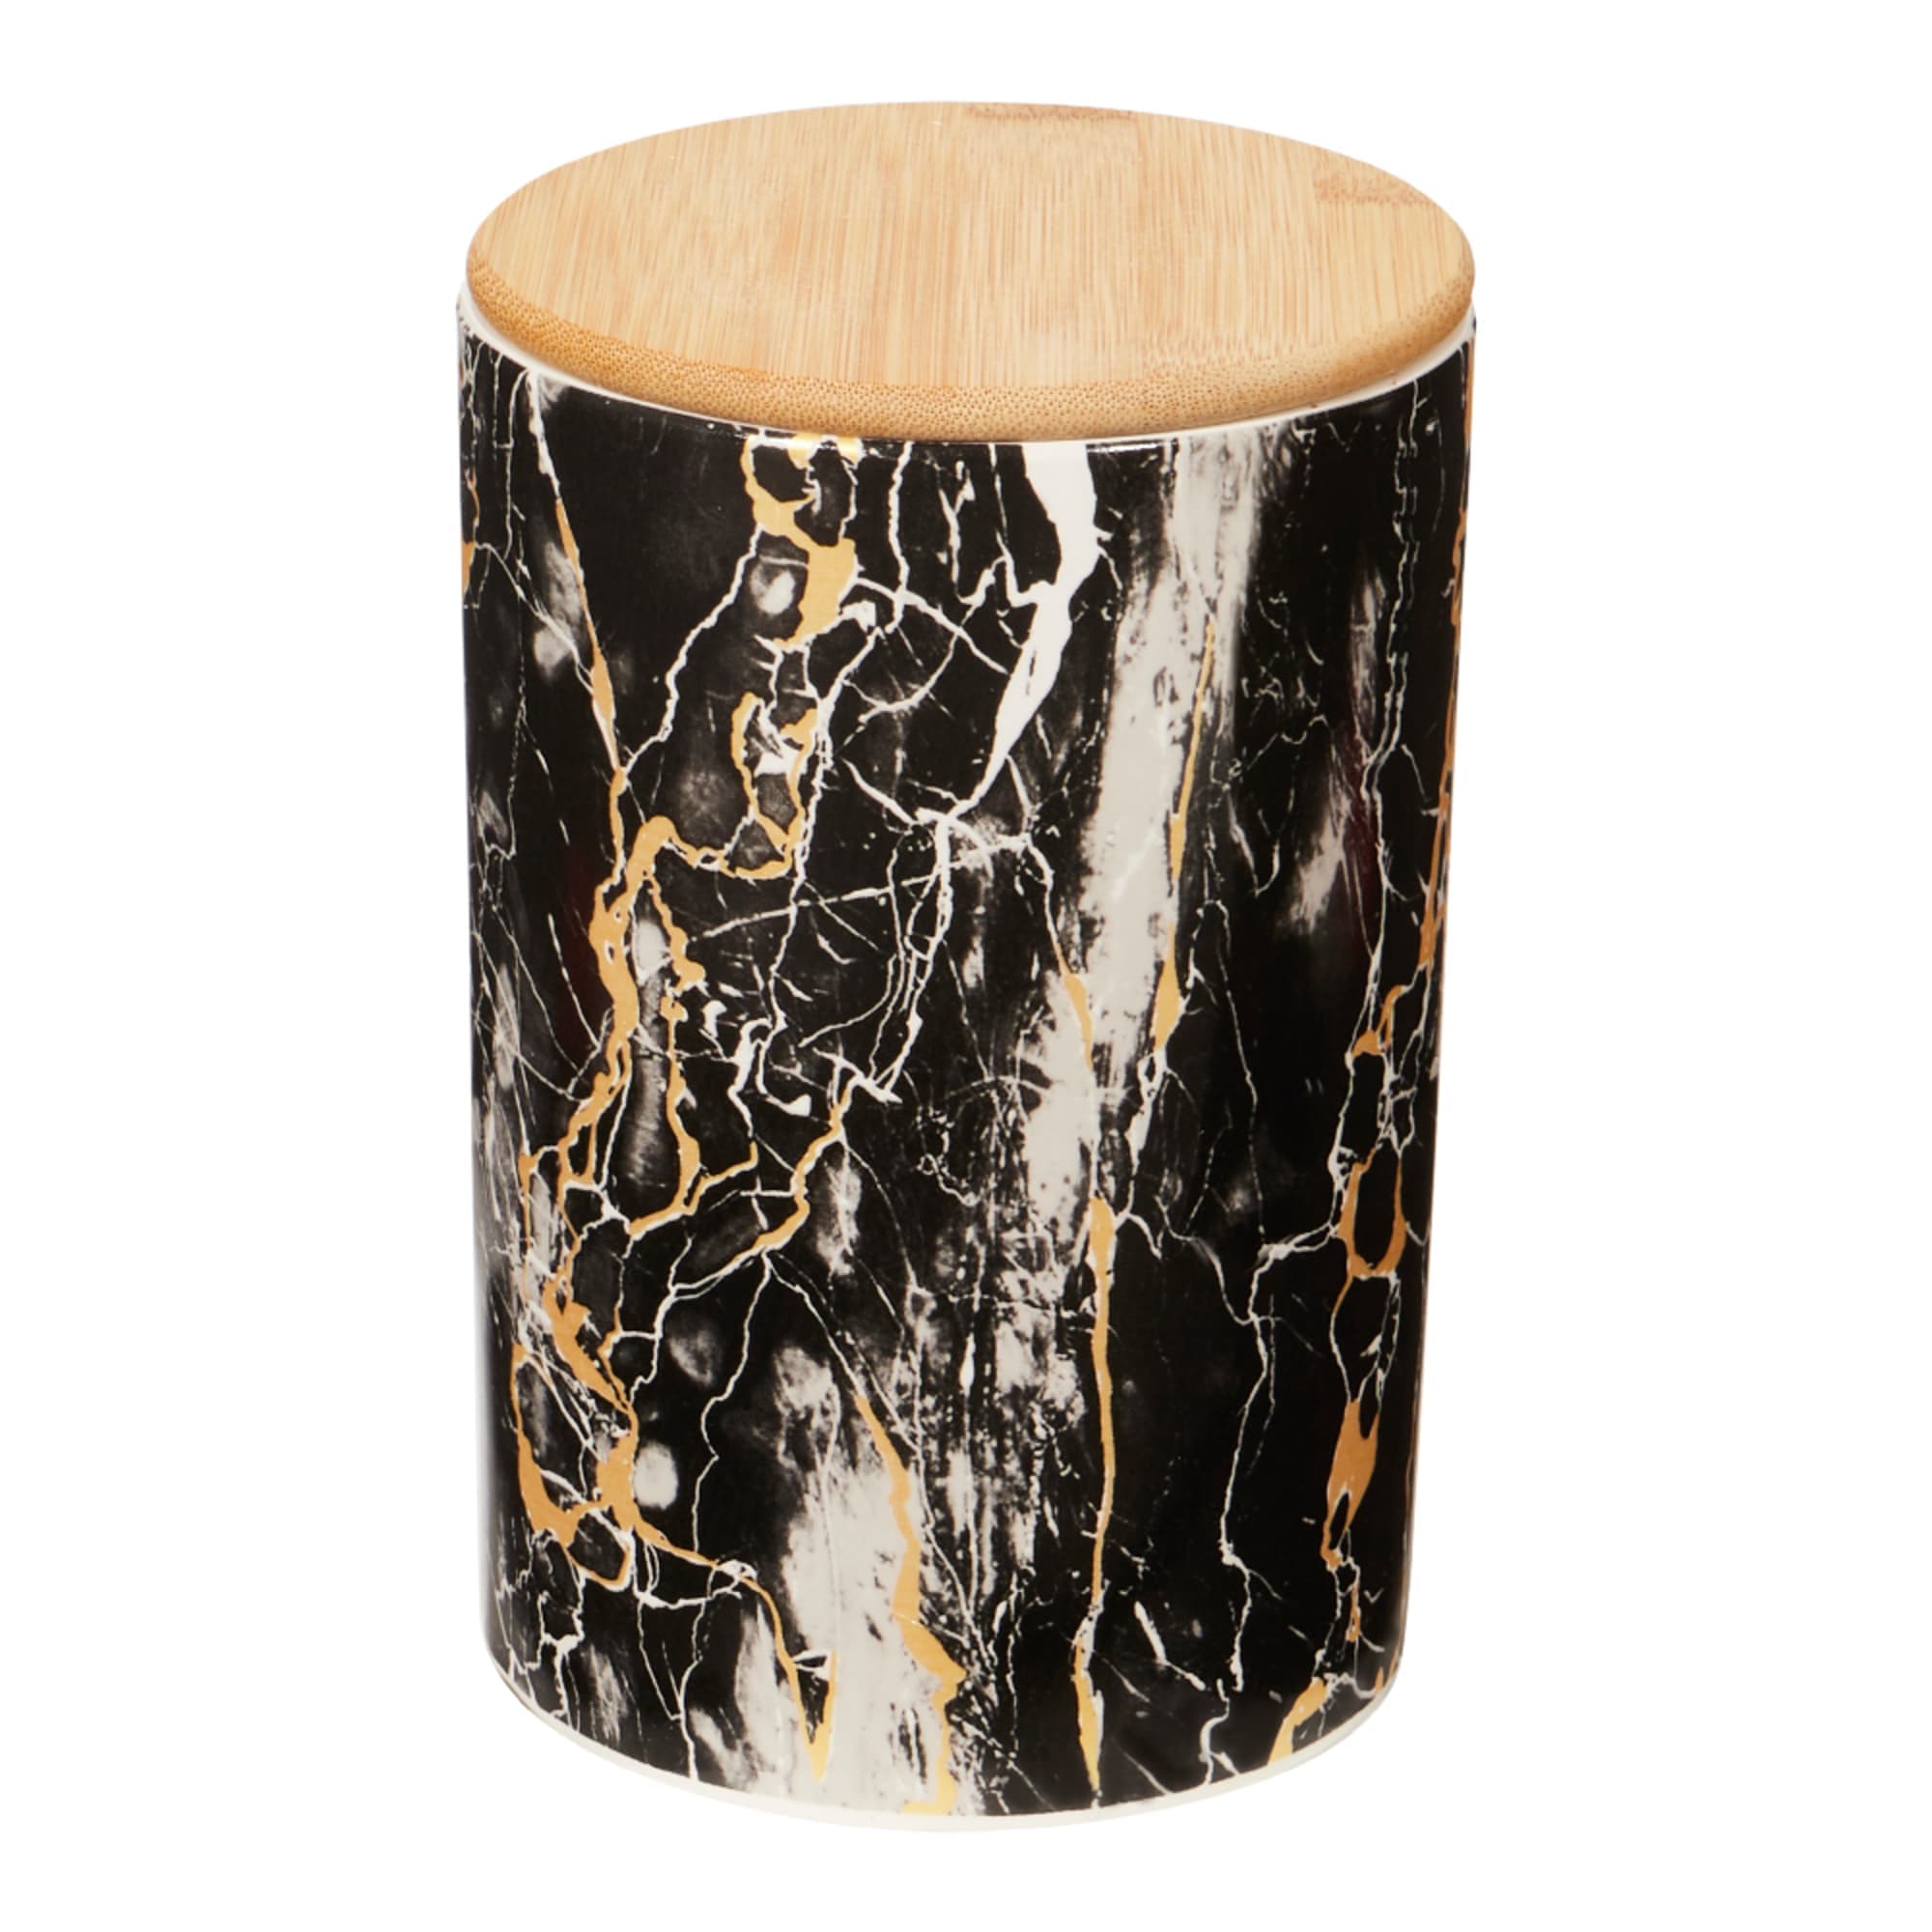 Home Basics Marble Print Large Ceramic Canister with Bamboo Top, Black
 $7.00 EACH, CASE PACK OF 12